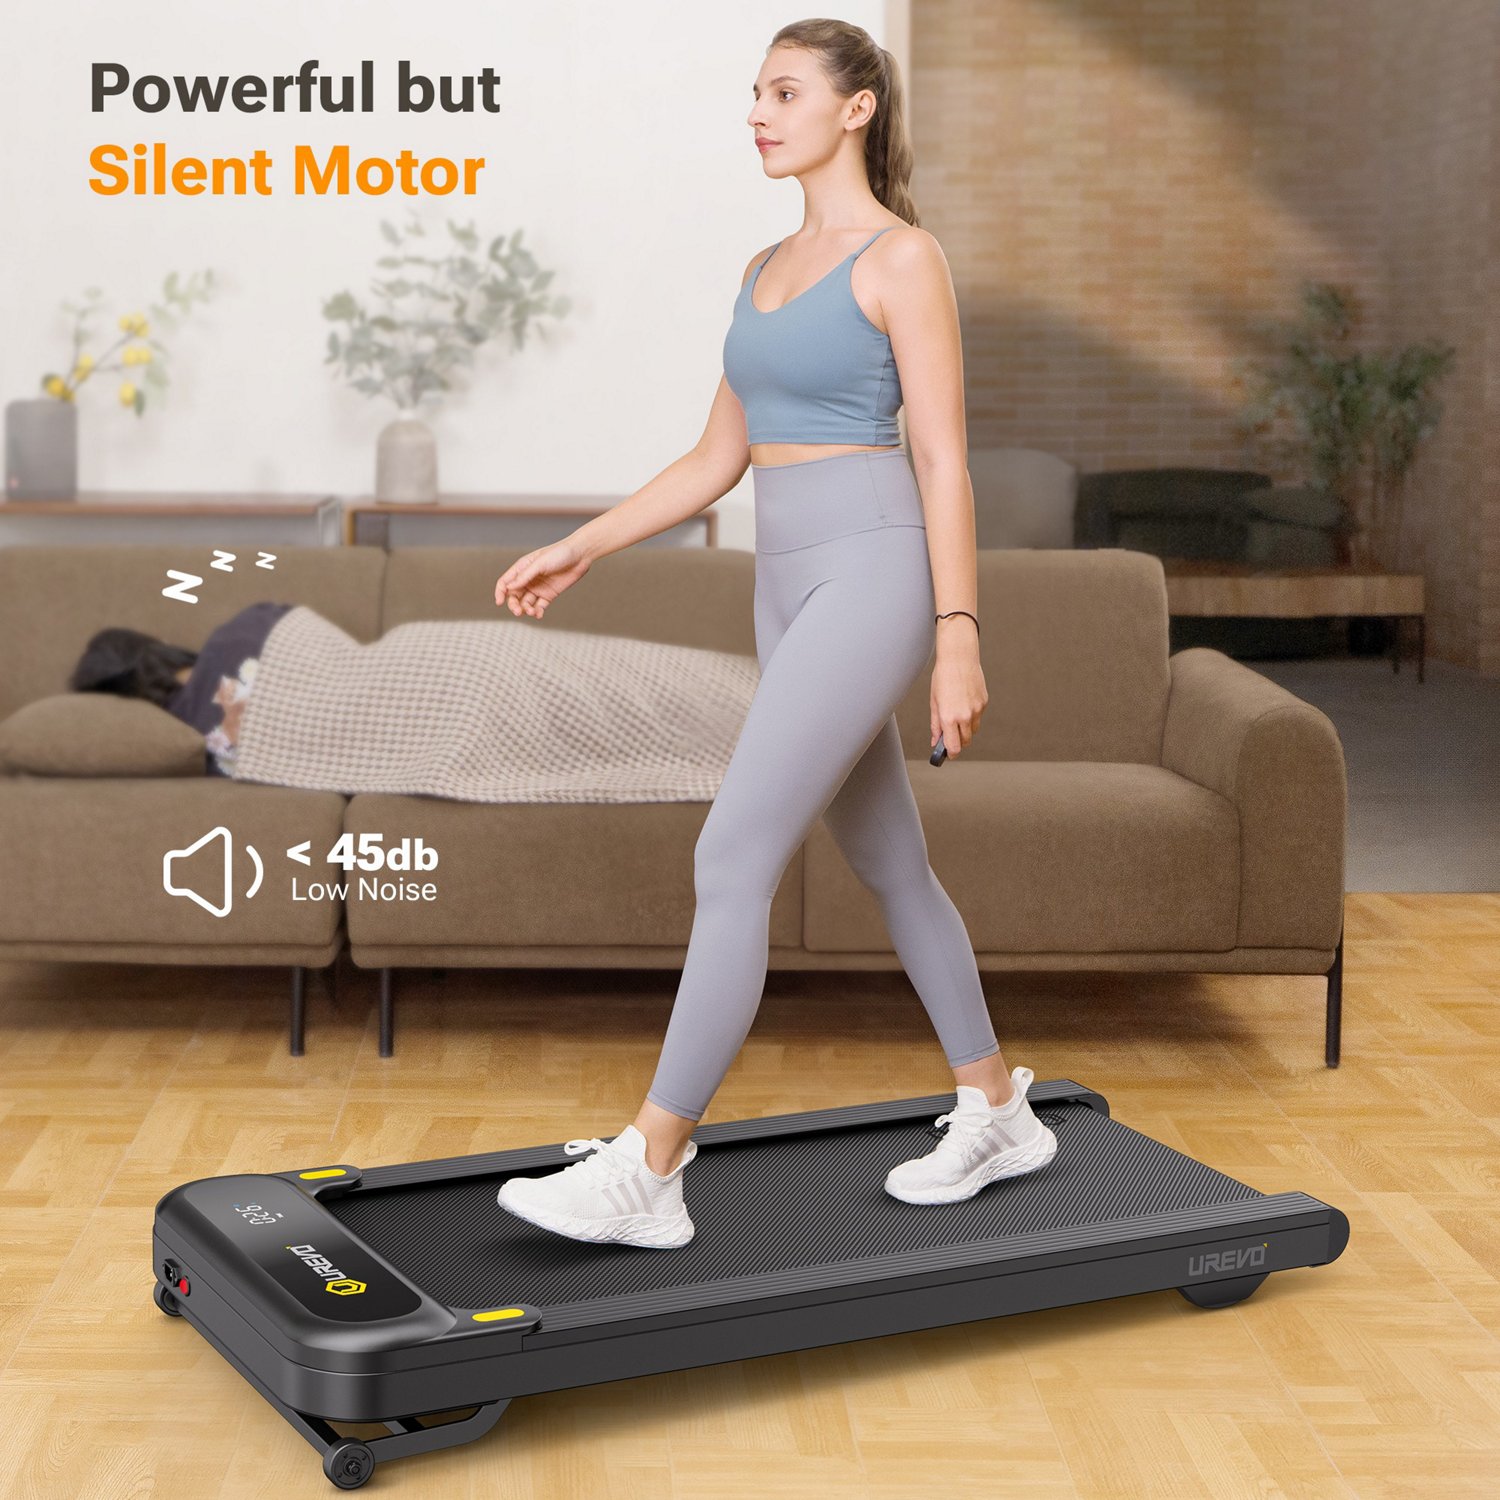 UREVO 3S Walking Treadmill with Auto Incline                                                                                     - view number 6